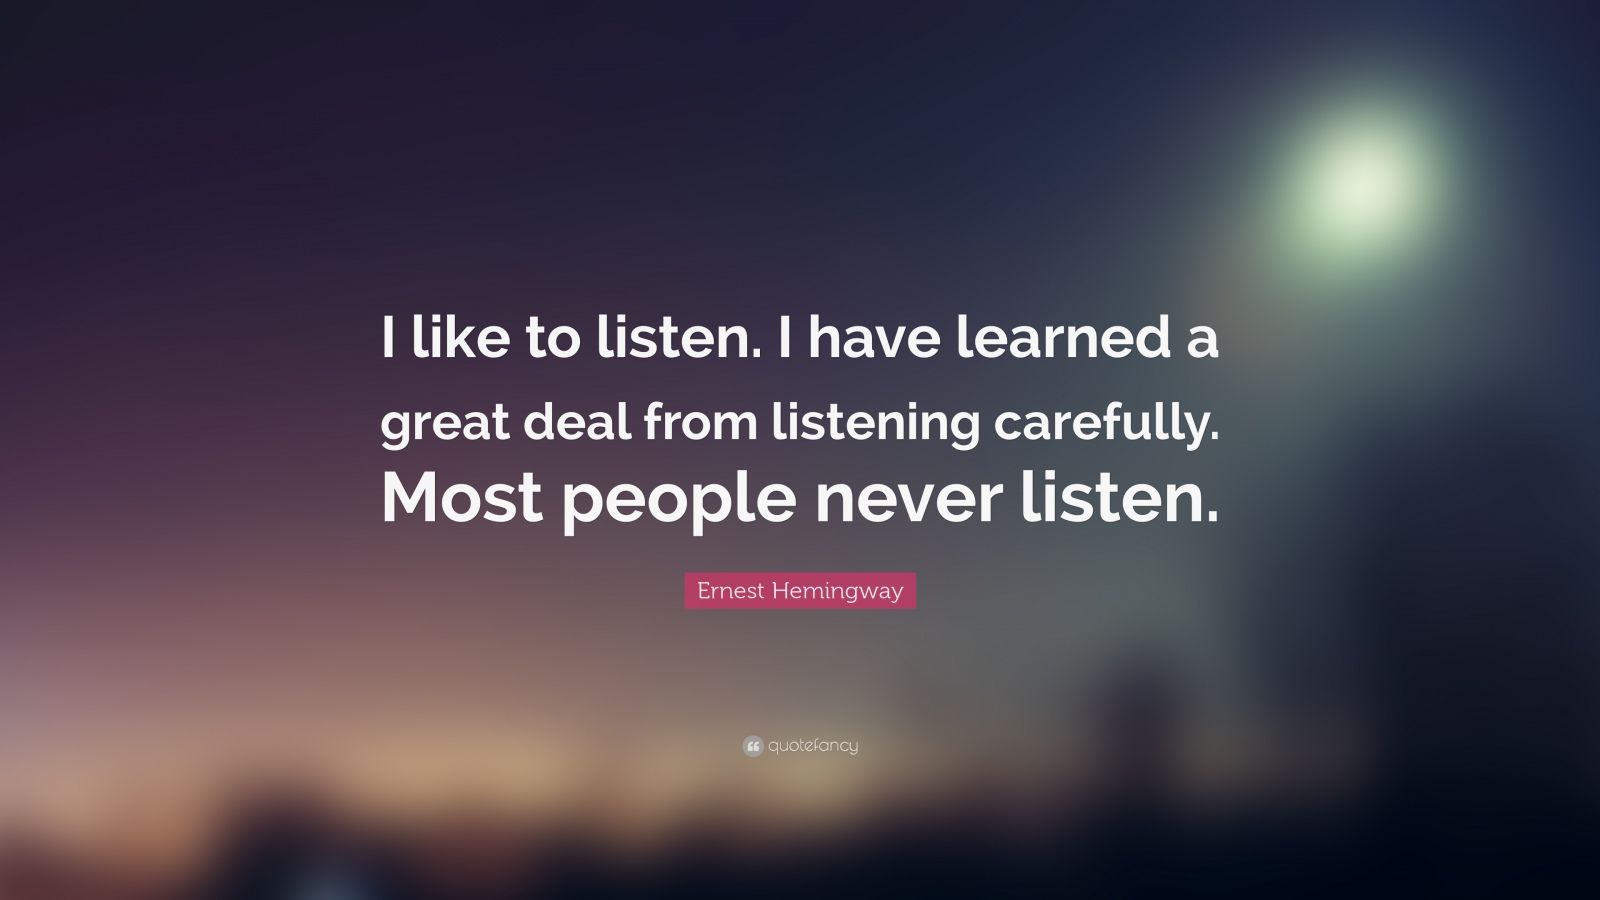 Ernest Hemingway Quote: “I like to listen. I have learned a great deal